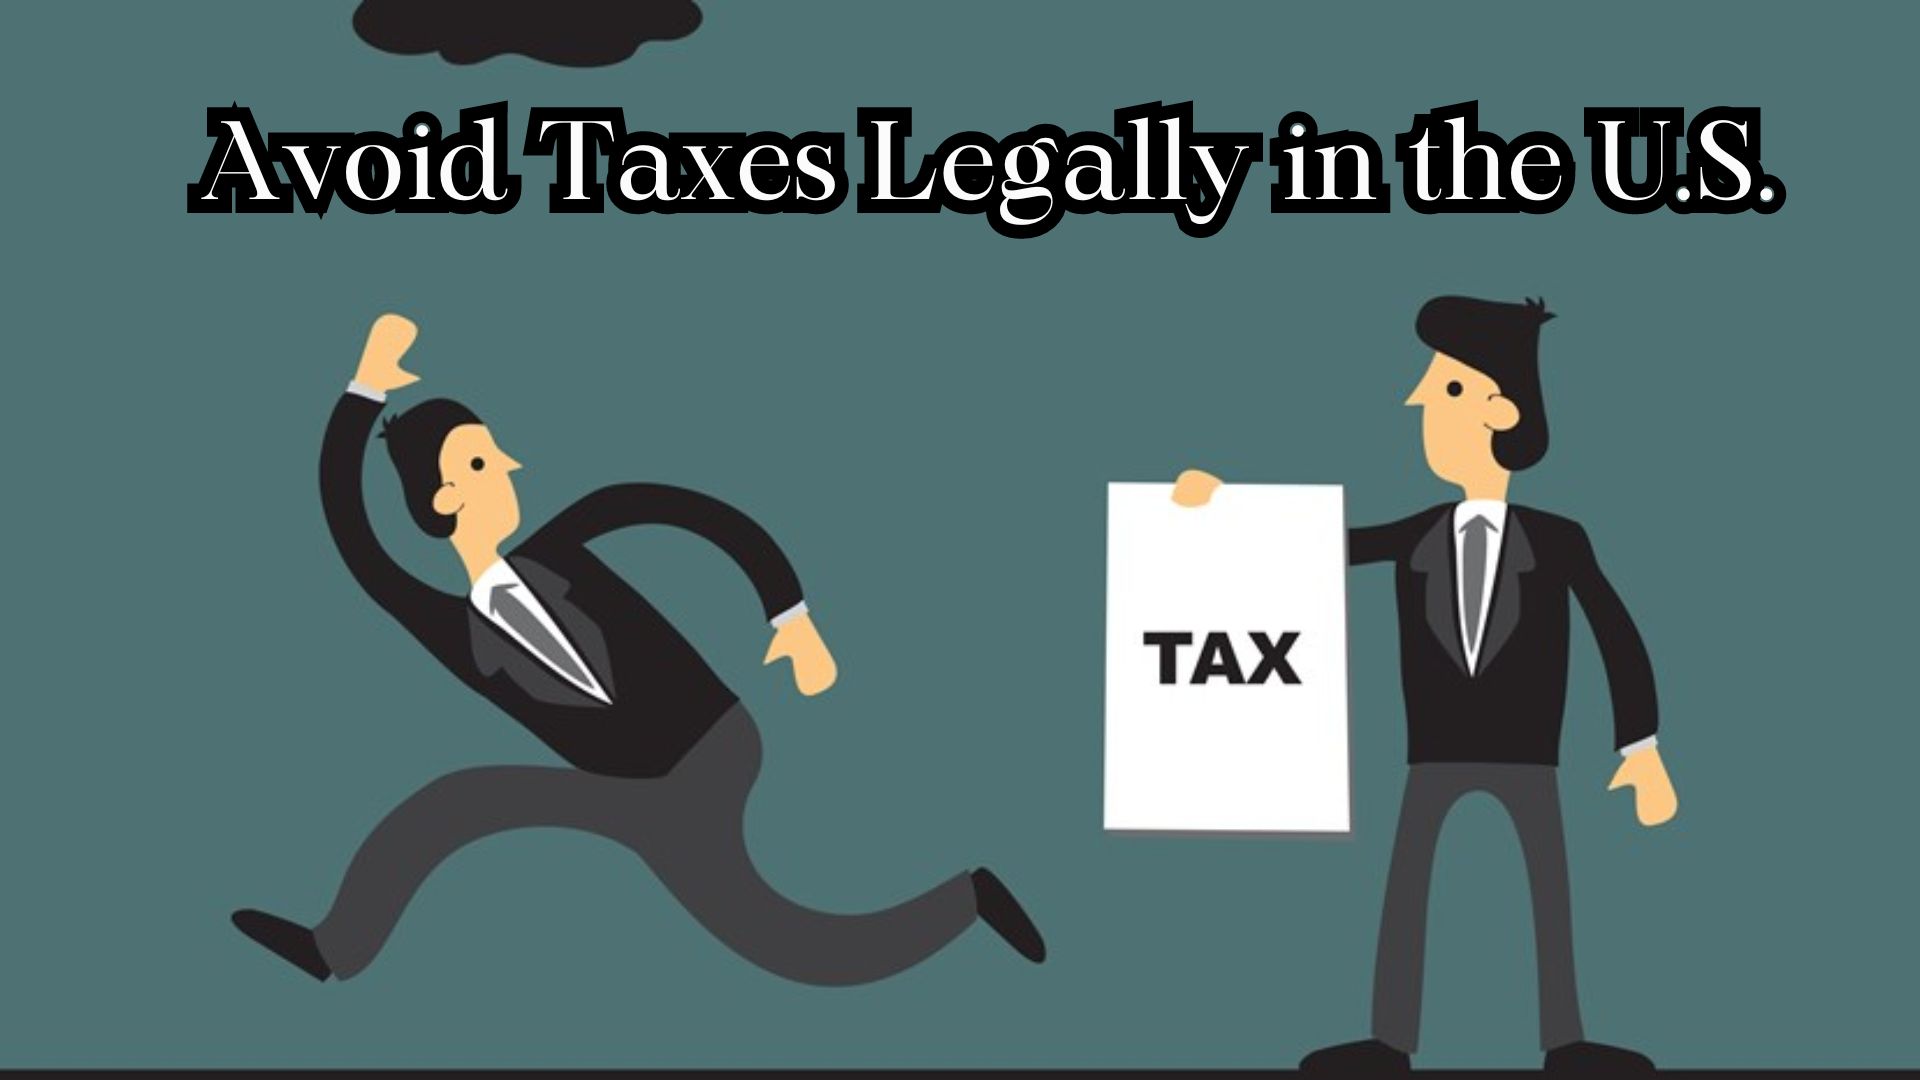 How to Avoid Taxes Legally in the U.S.